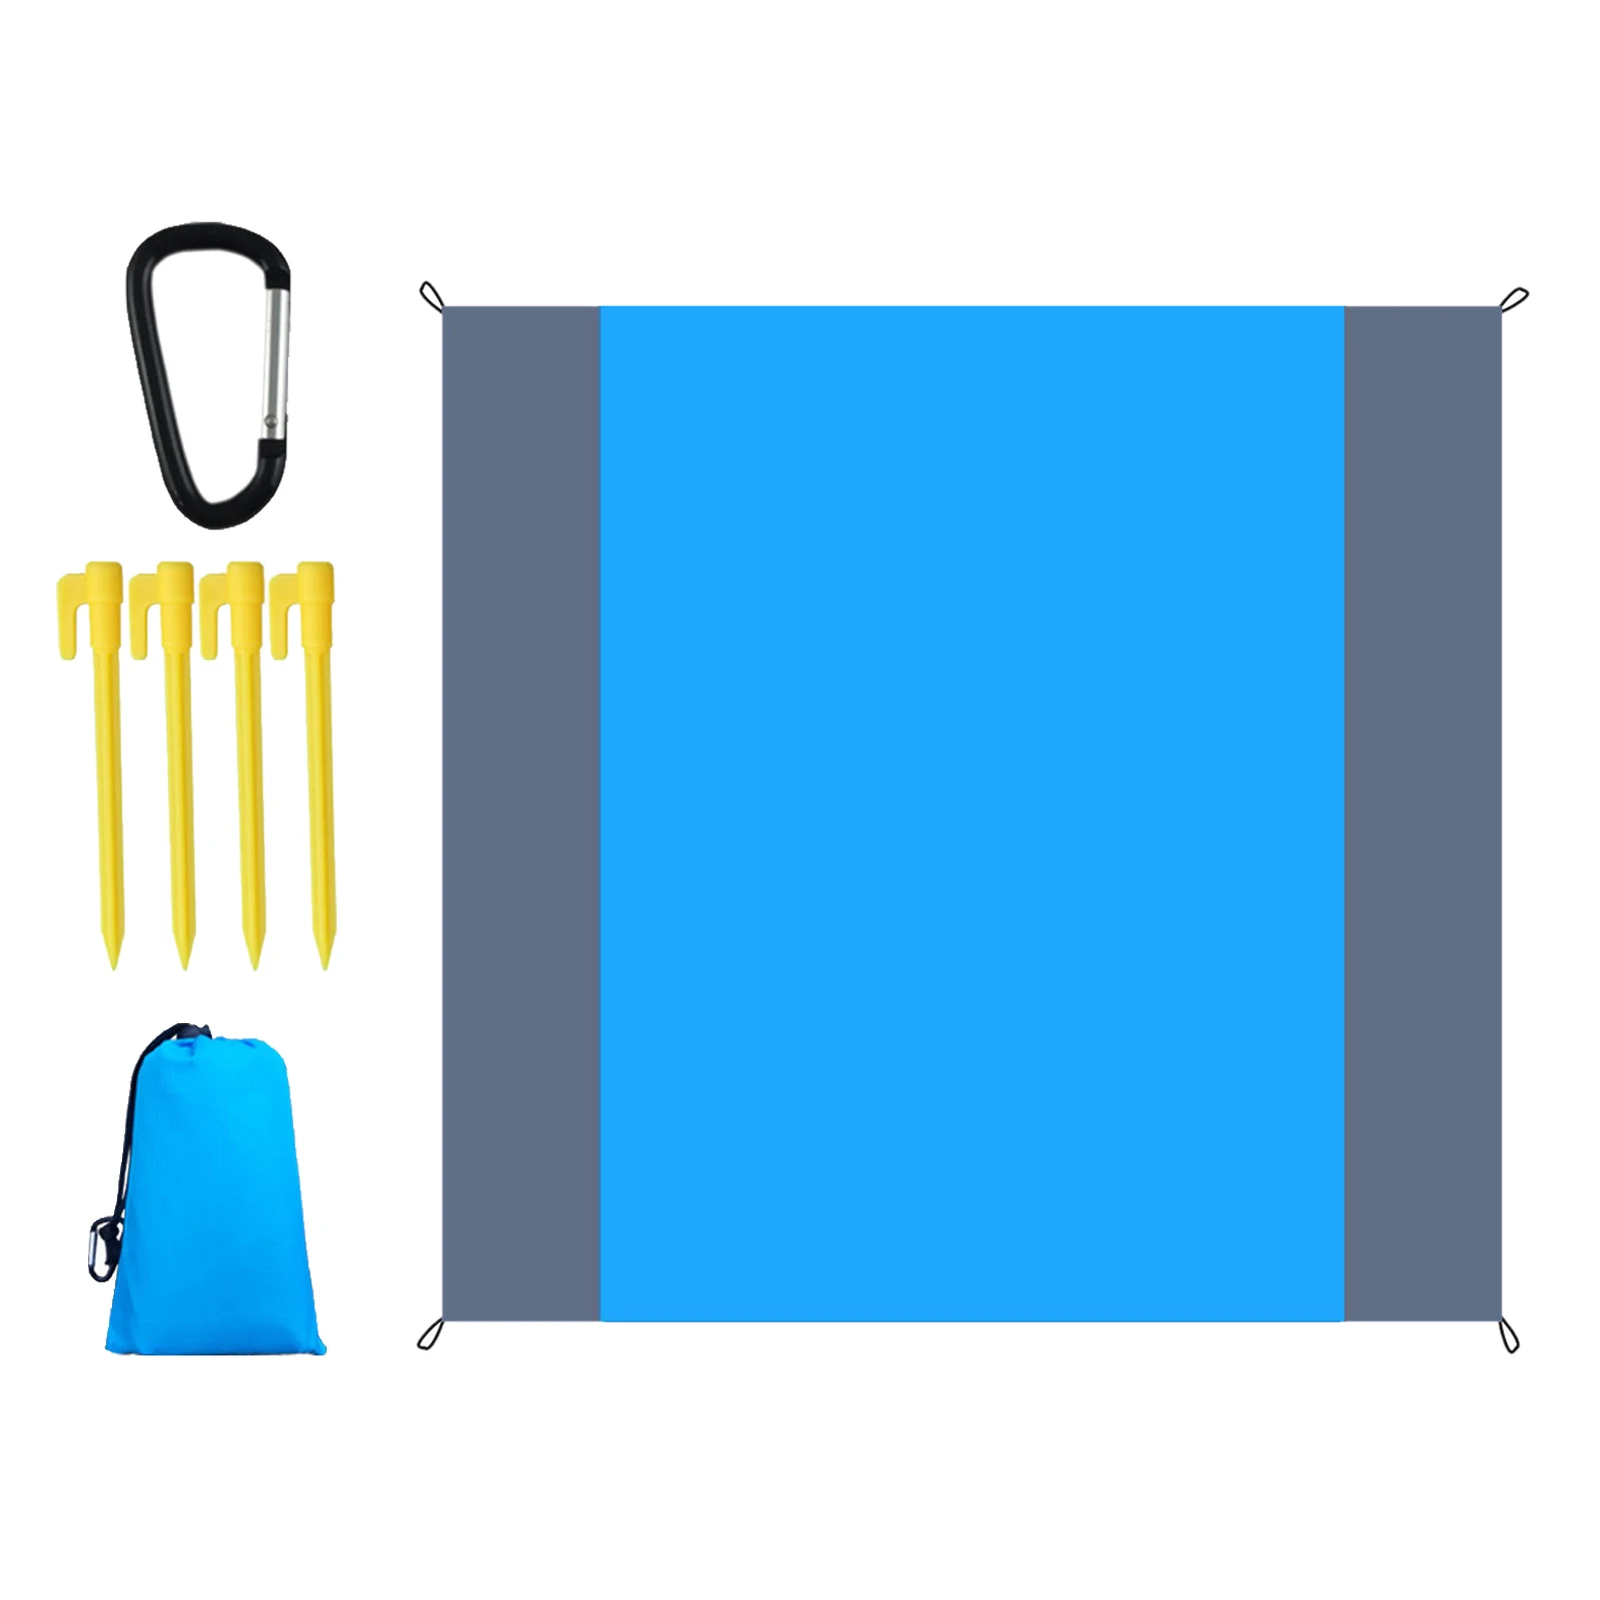 210x200cm Extra Large Beach Blanket Quick Drying Picnic Mat Camping